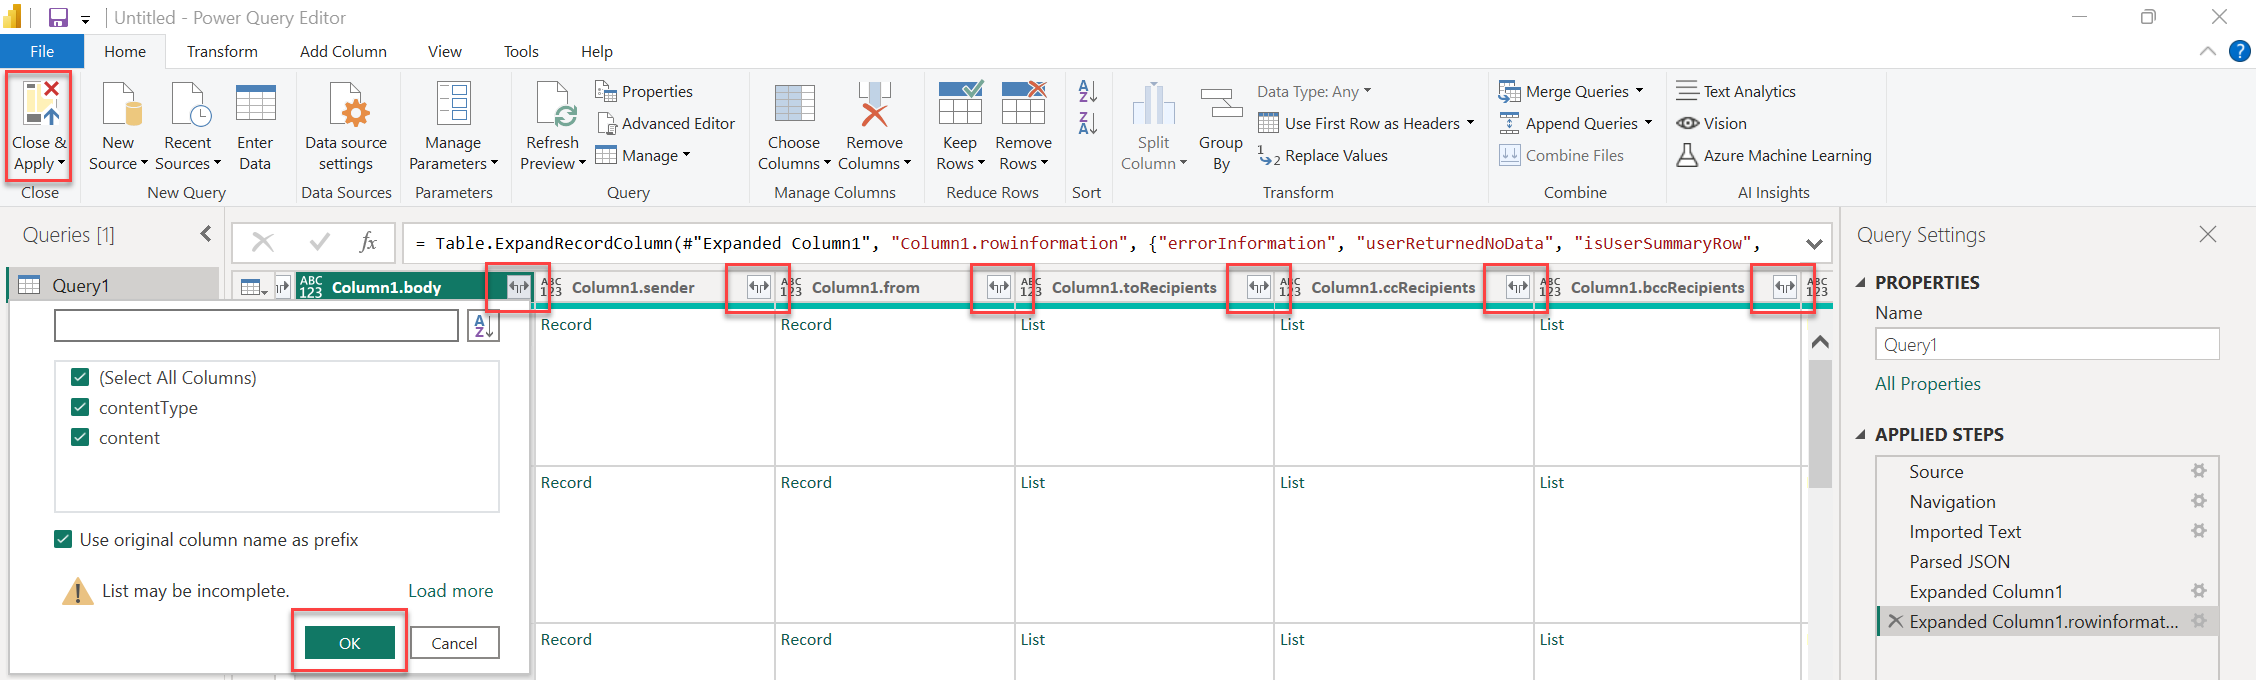 A screenshot that shows how to load all the columns in Power BI.